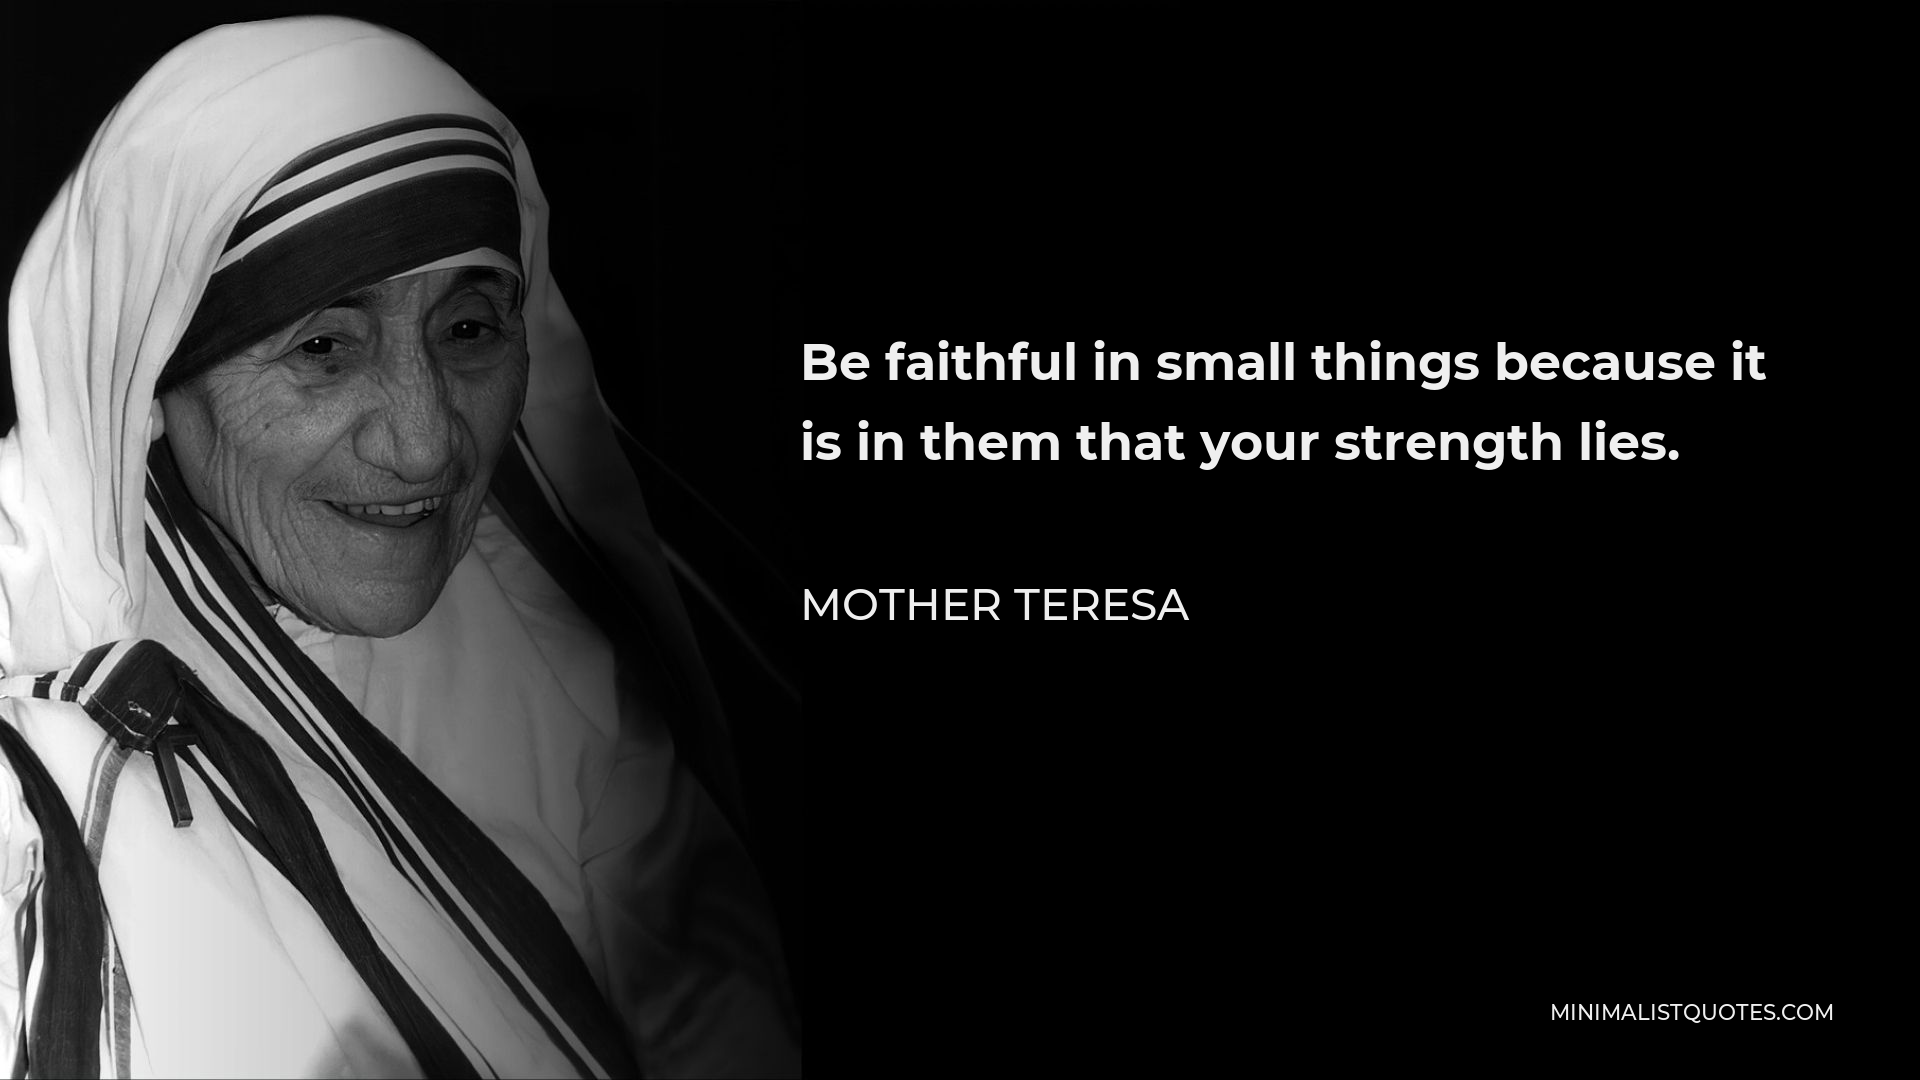 Mother Teresa Quote - Be faithful in small things because it is in them that your strength lies.